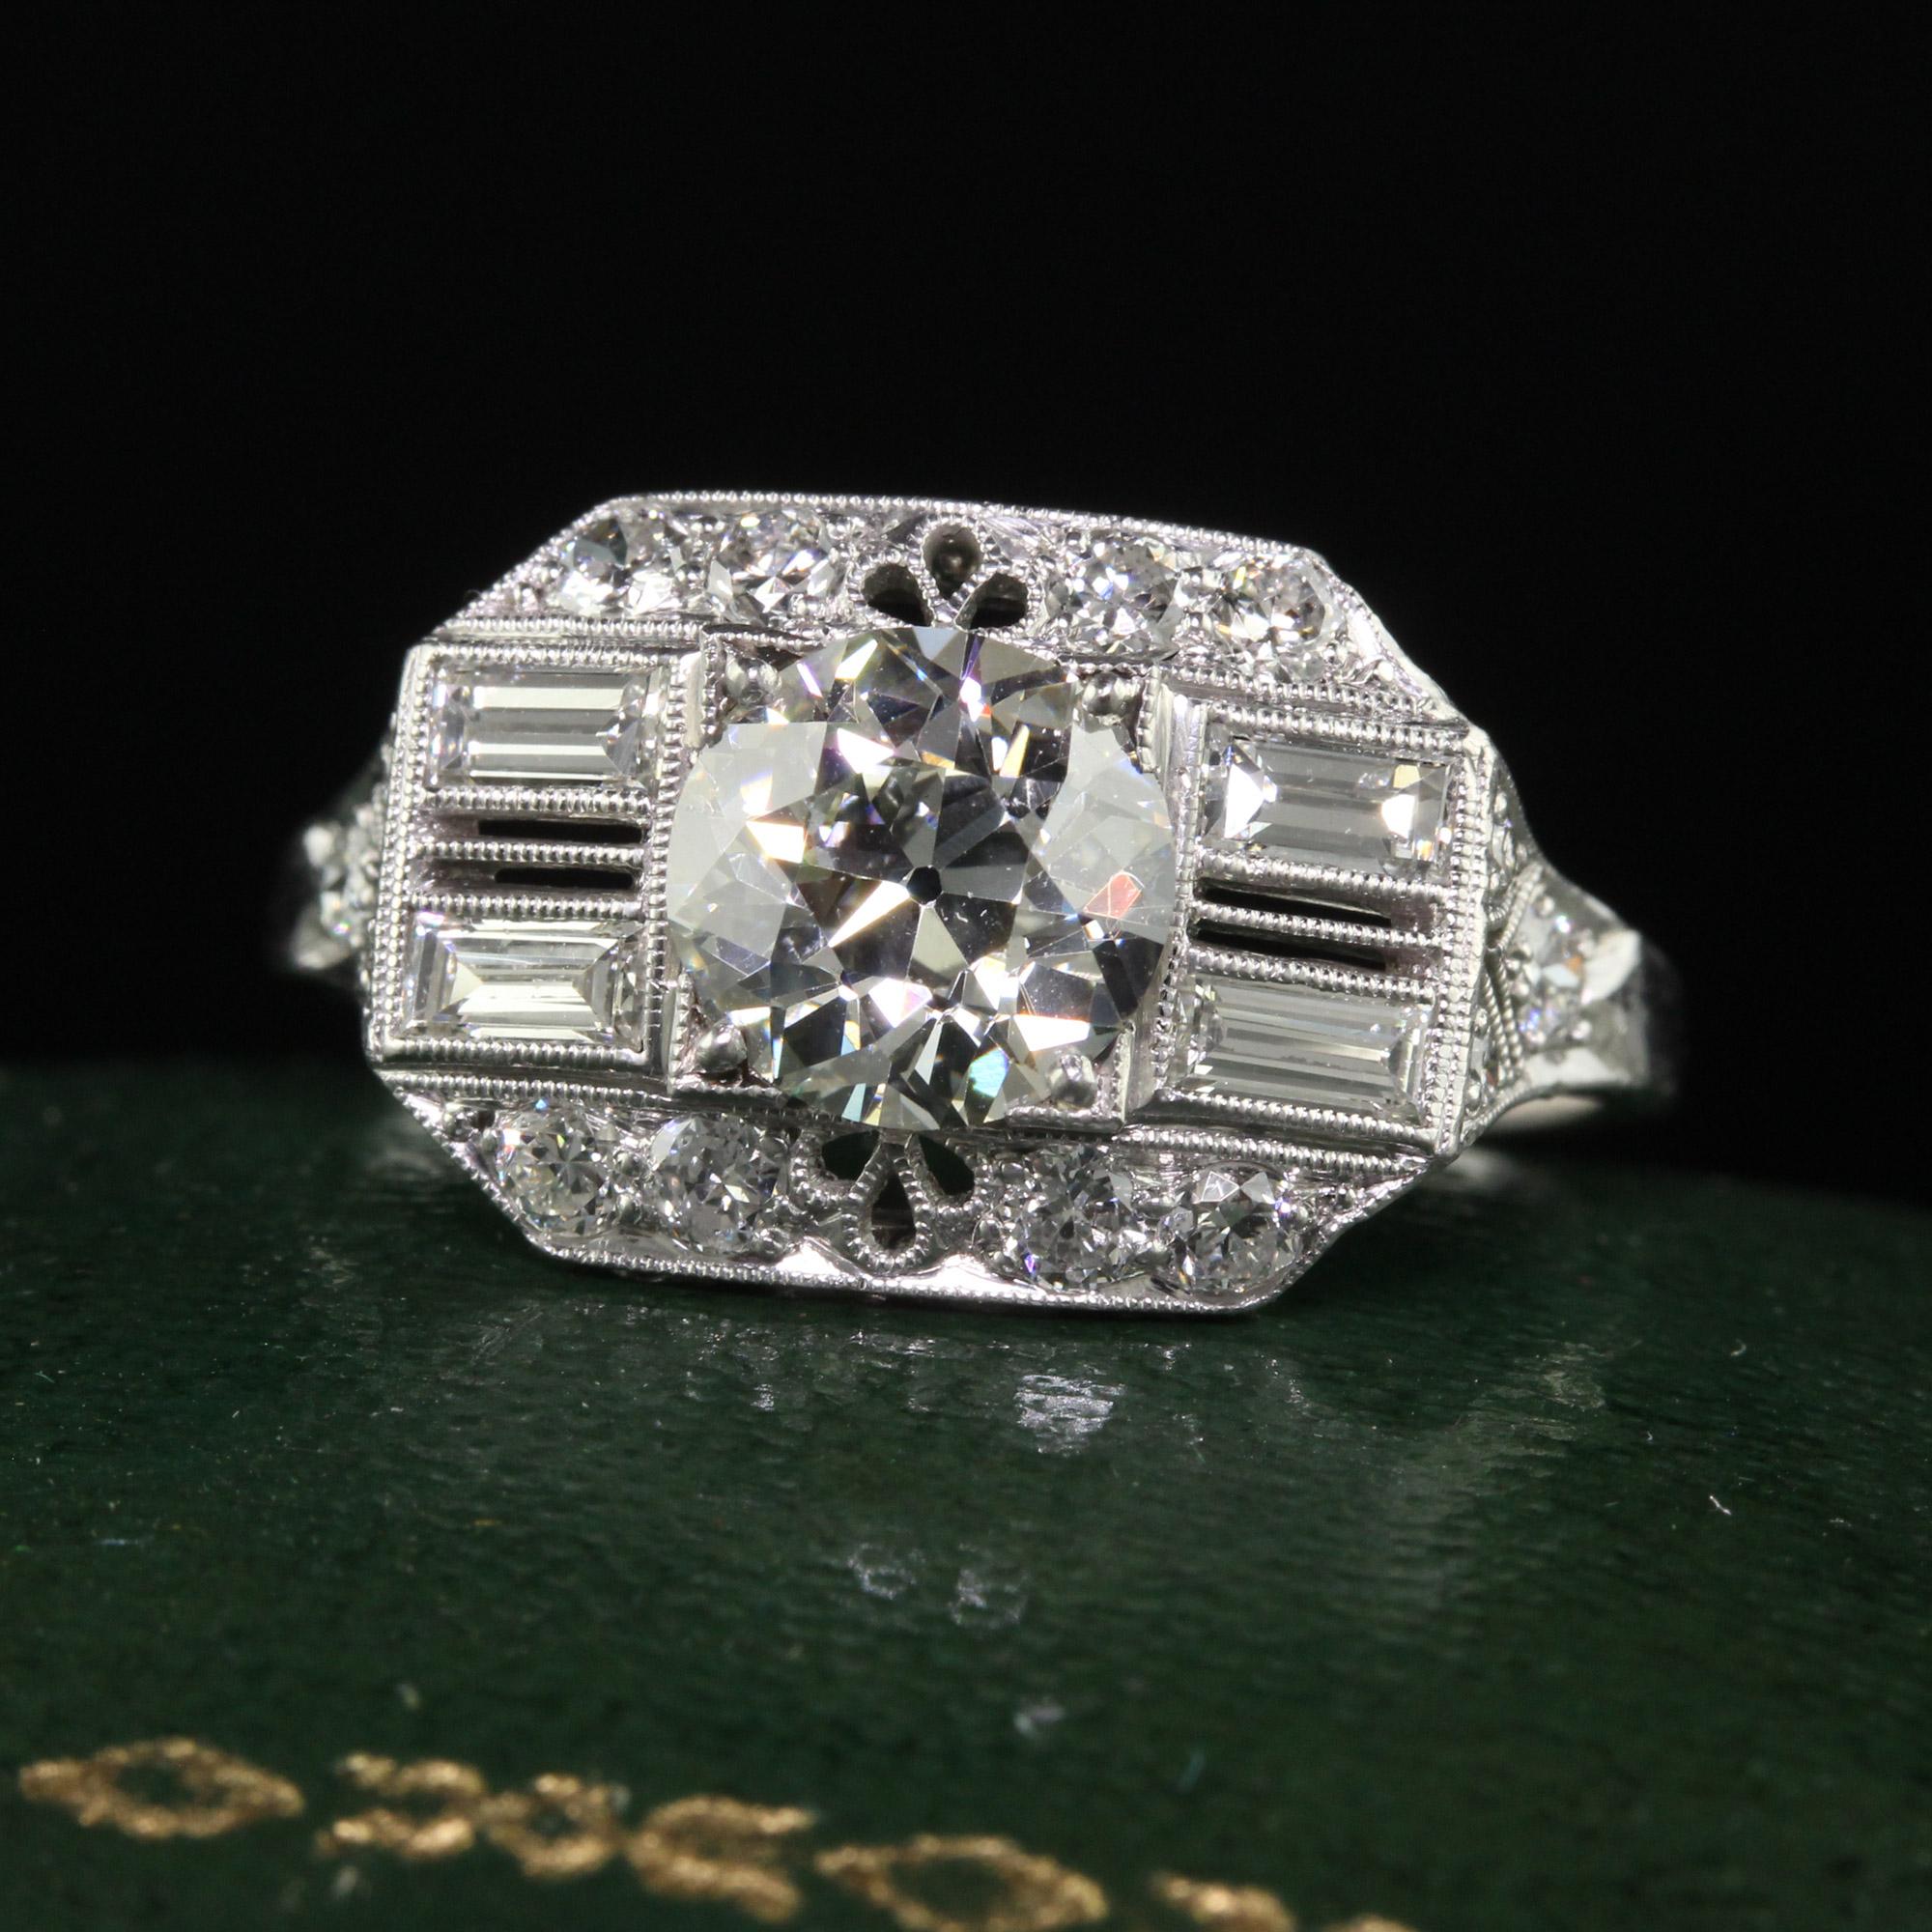 Beautiful Antique Art Deco Platinum Old European Diamond Filigree Engagement Ring - GIA. This incredible art deco engagement ring is crafted in platinum. The center holds a a gorgeous old European cut diamond that has a GIA report. It is set in an